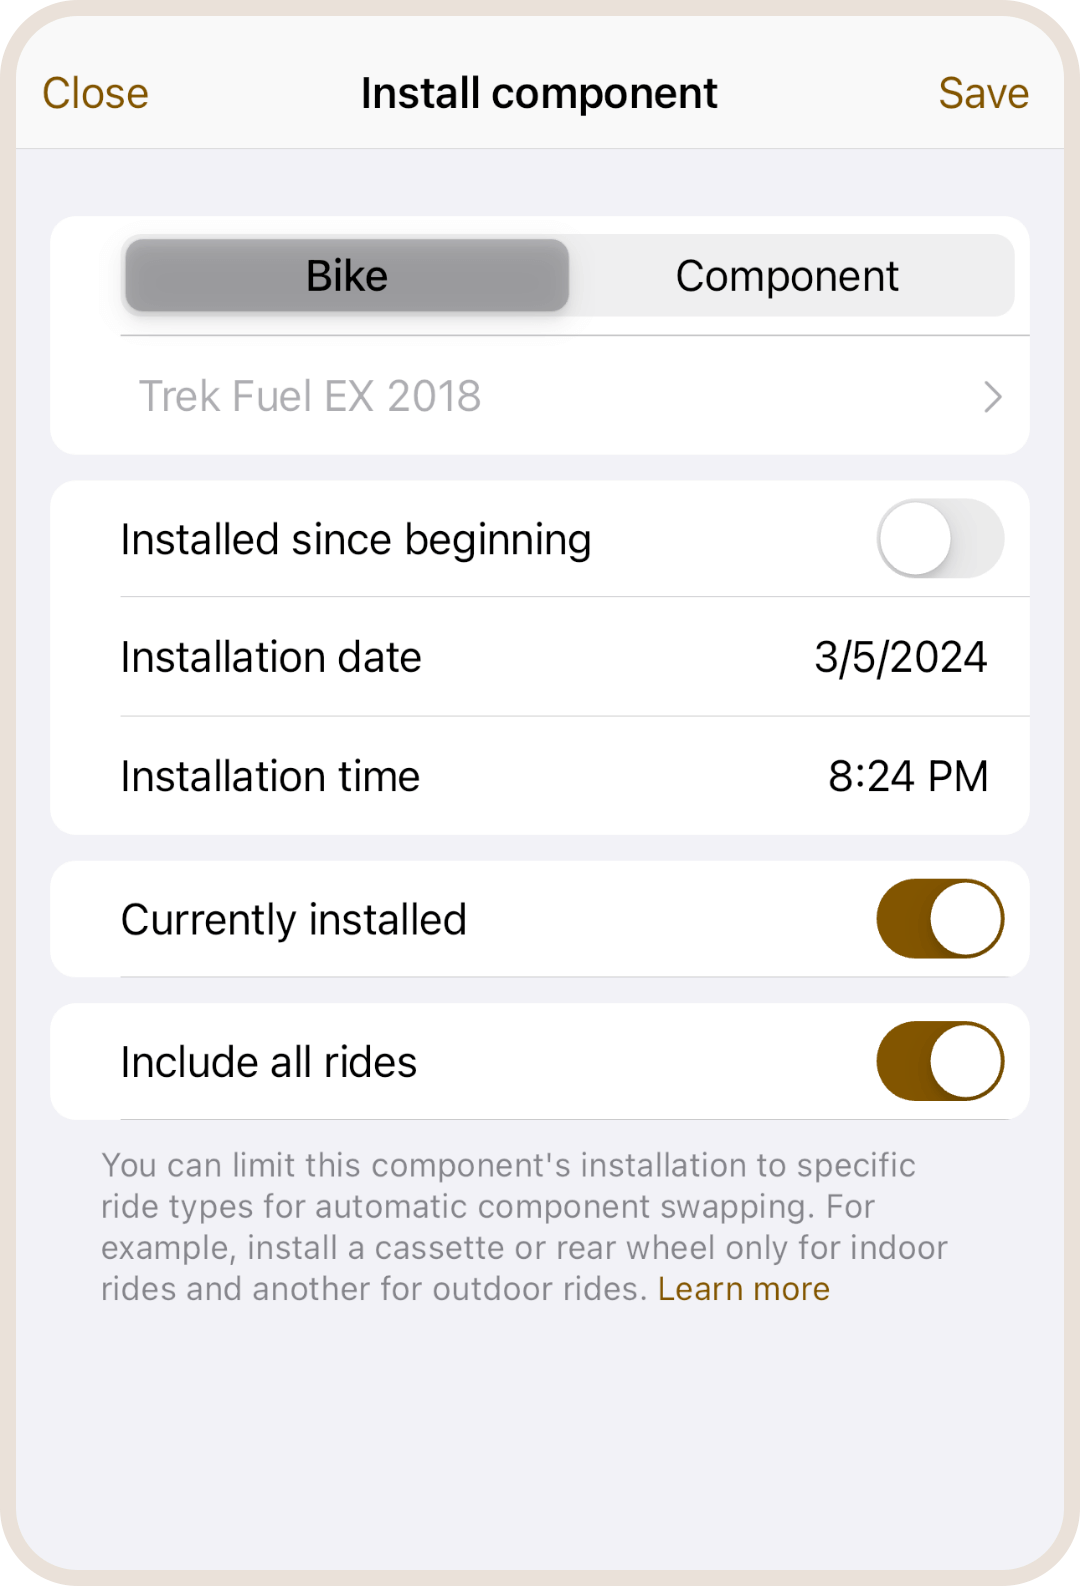 Install component form in ProBikeGarage app